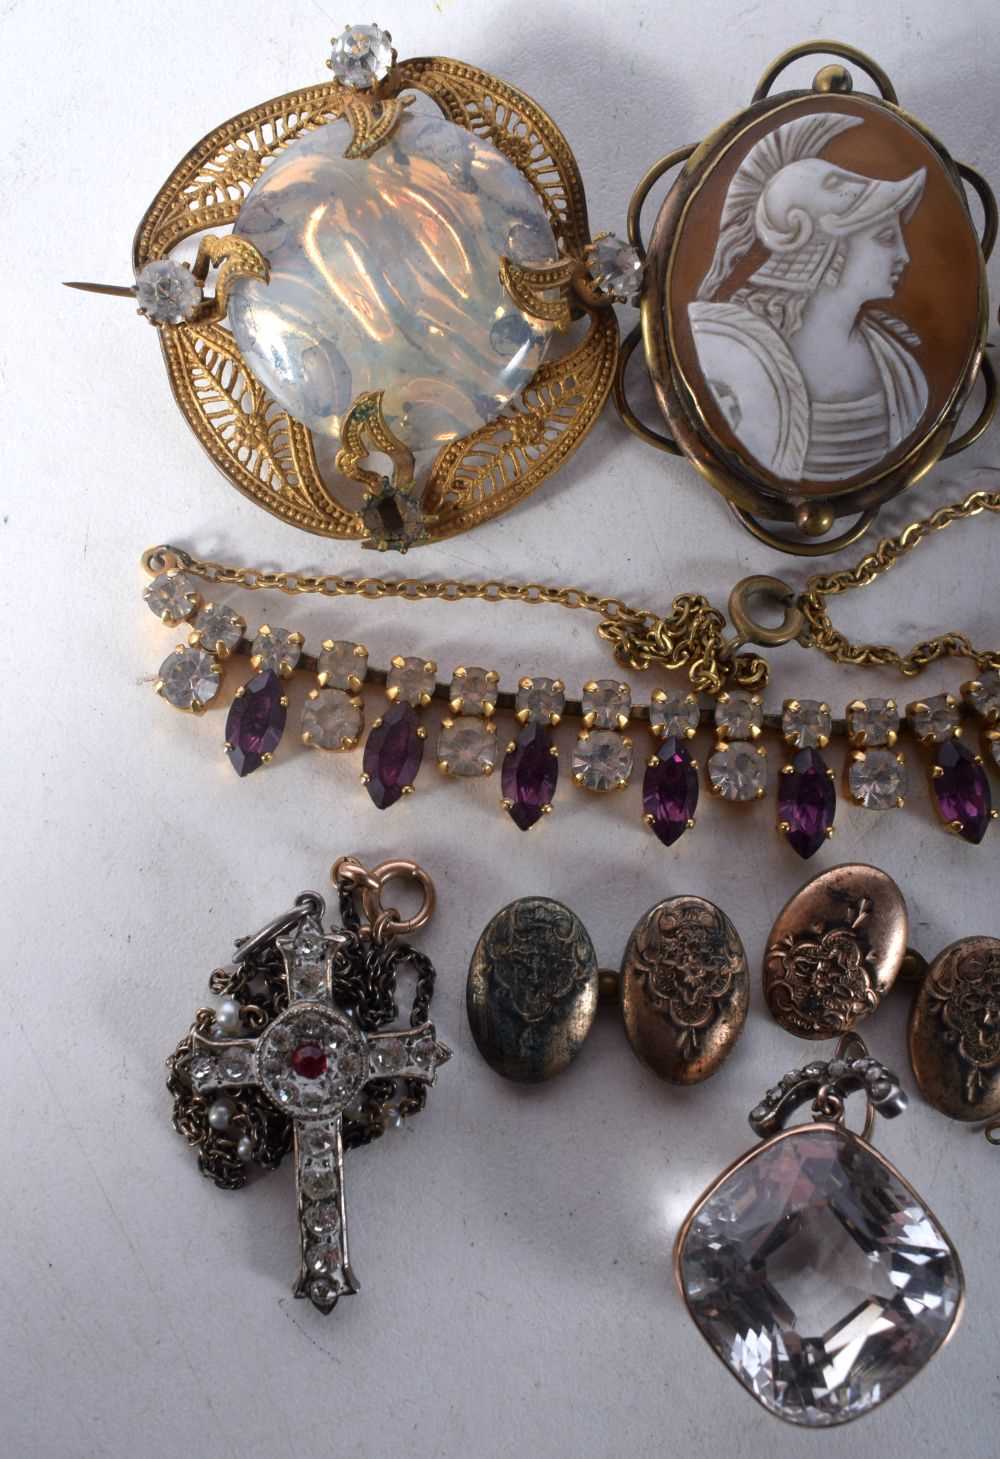 A Collection of Antique Jewellery including 3 Necklaces, A Pendant, Three Brooches and a Pair of - Image 2 of 4